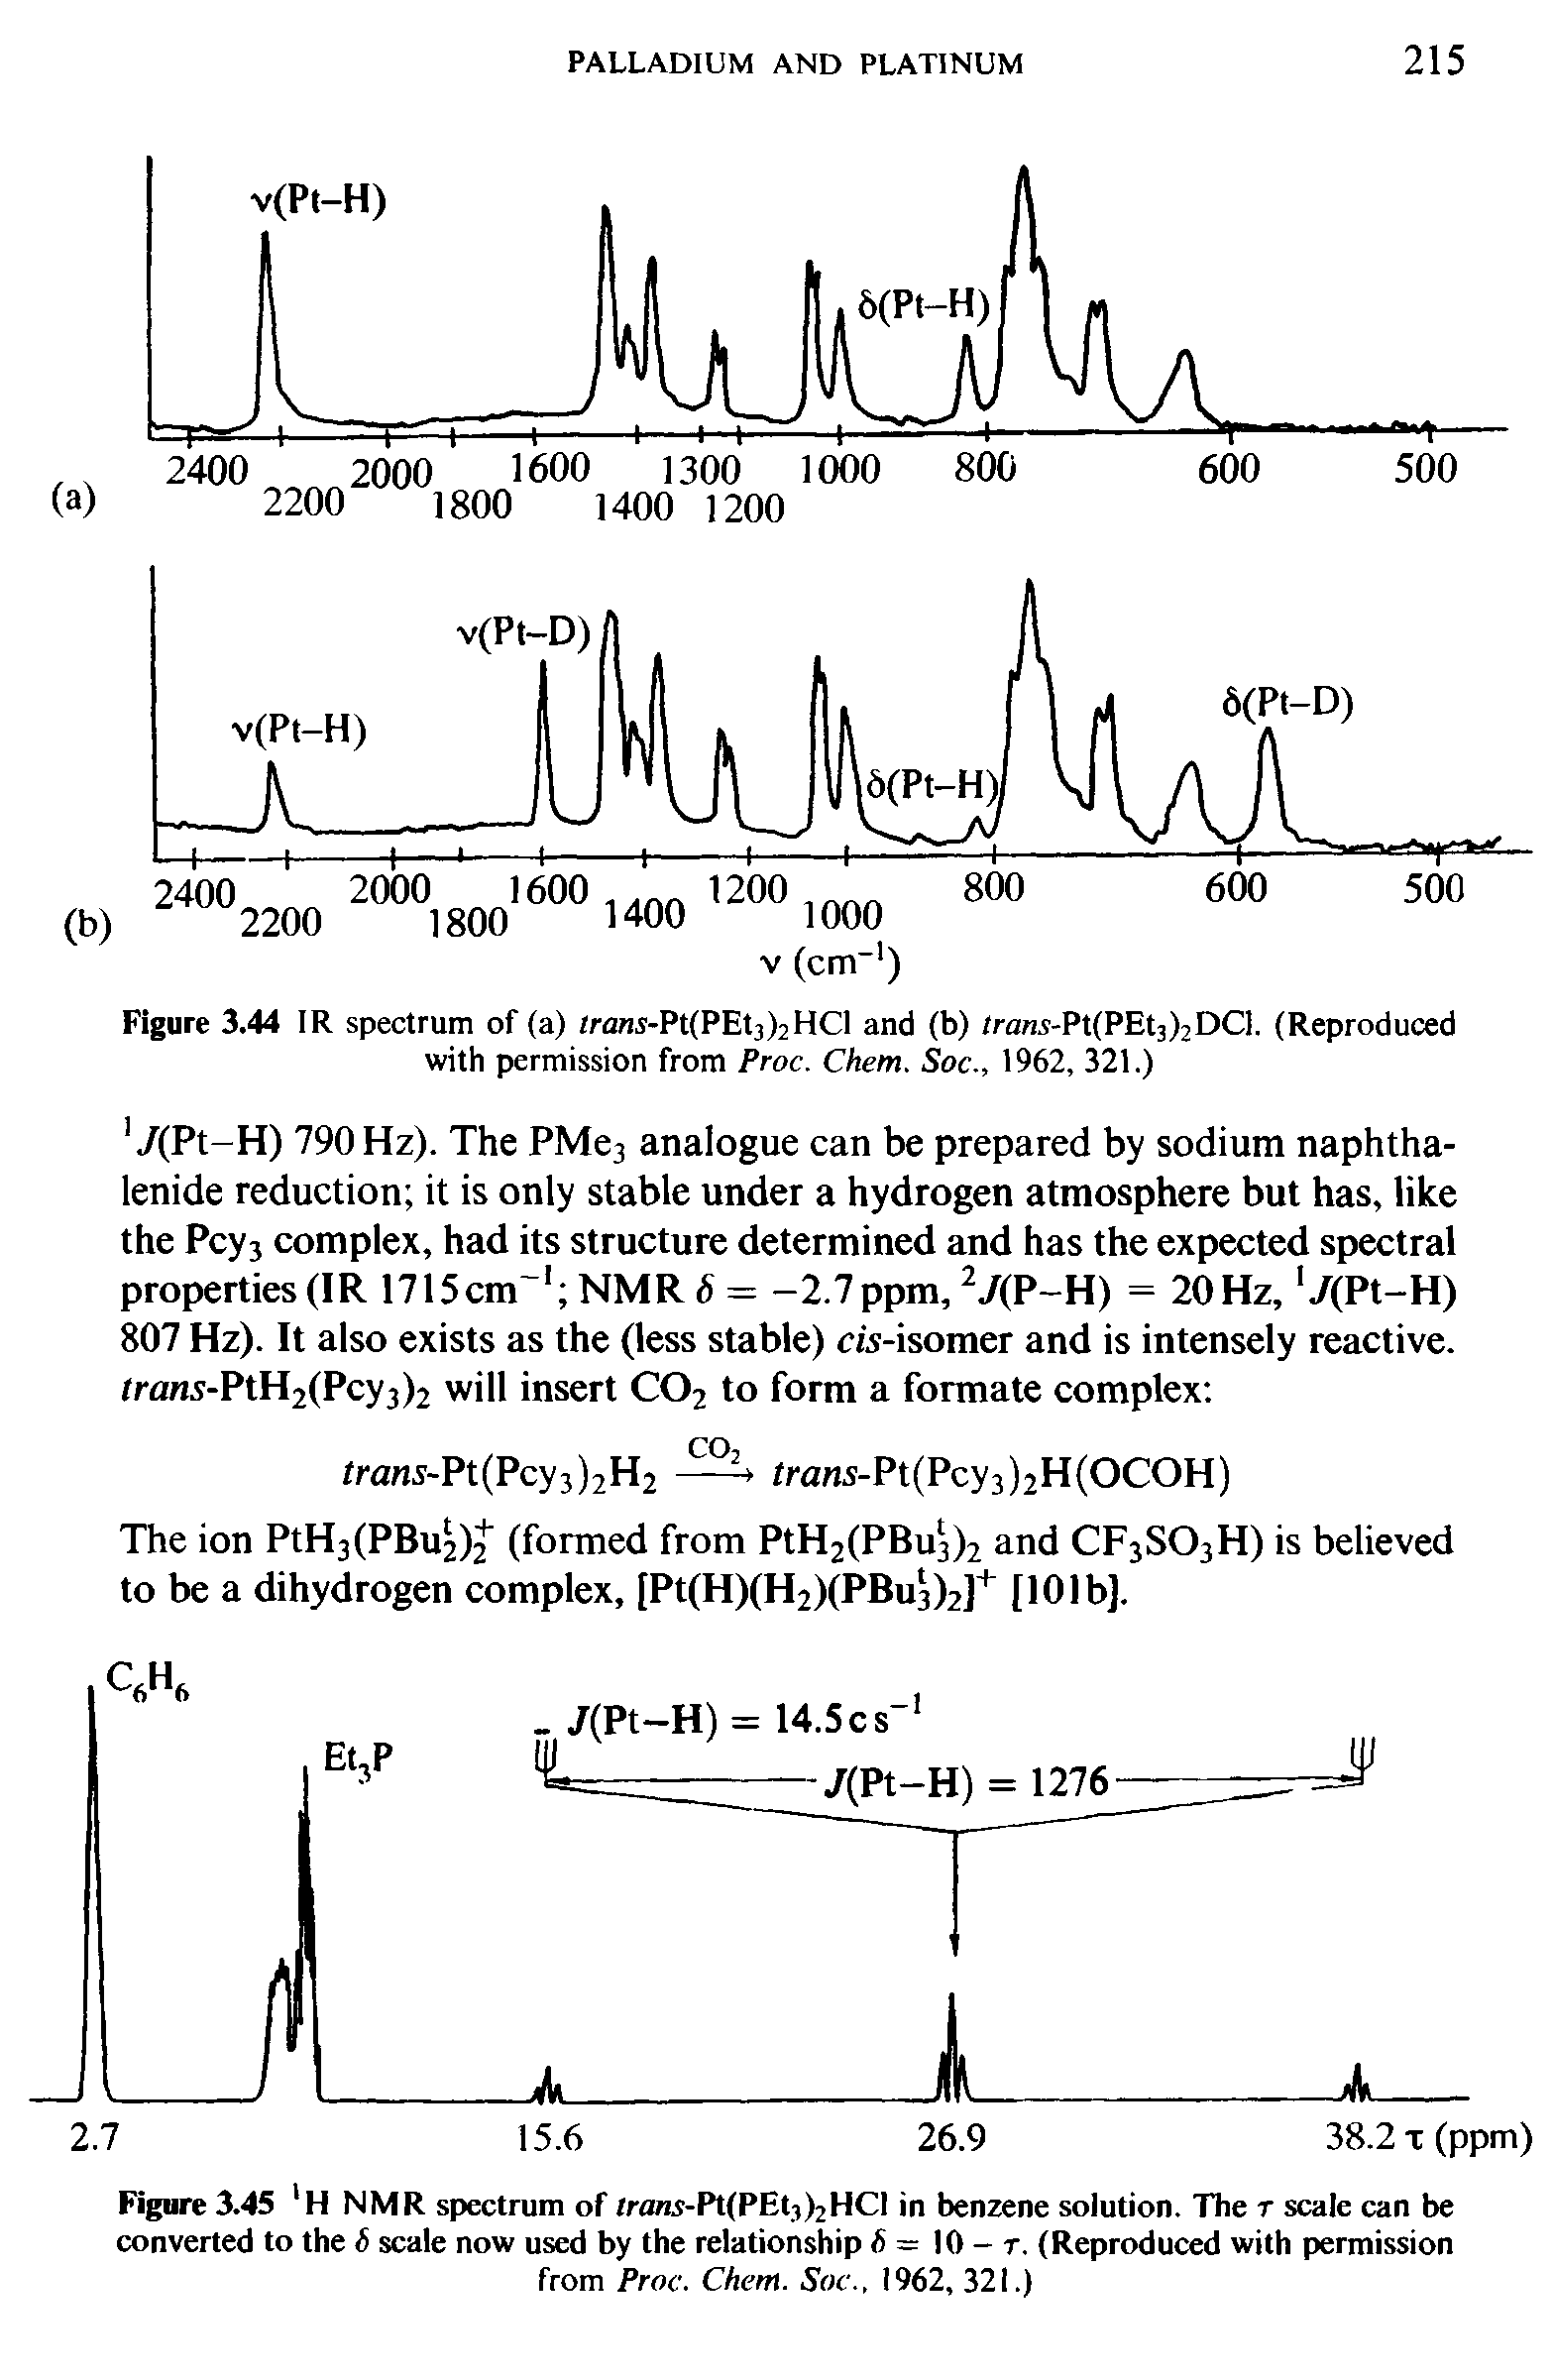 Figure 3.45 H NMR spectrum of trans-Pt(PEt1)2HCl in benzene solution. The r scale can be converted to the 6 scale now used by the relationship 6 = I0 - r. (Reproduced with permission from Proc. Chem. Soc.. 1962, 321.)...